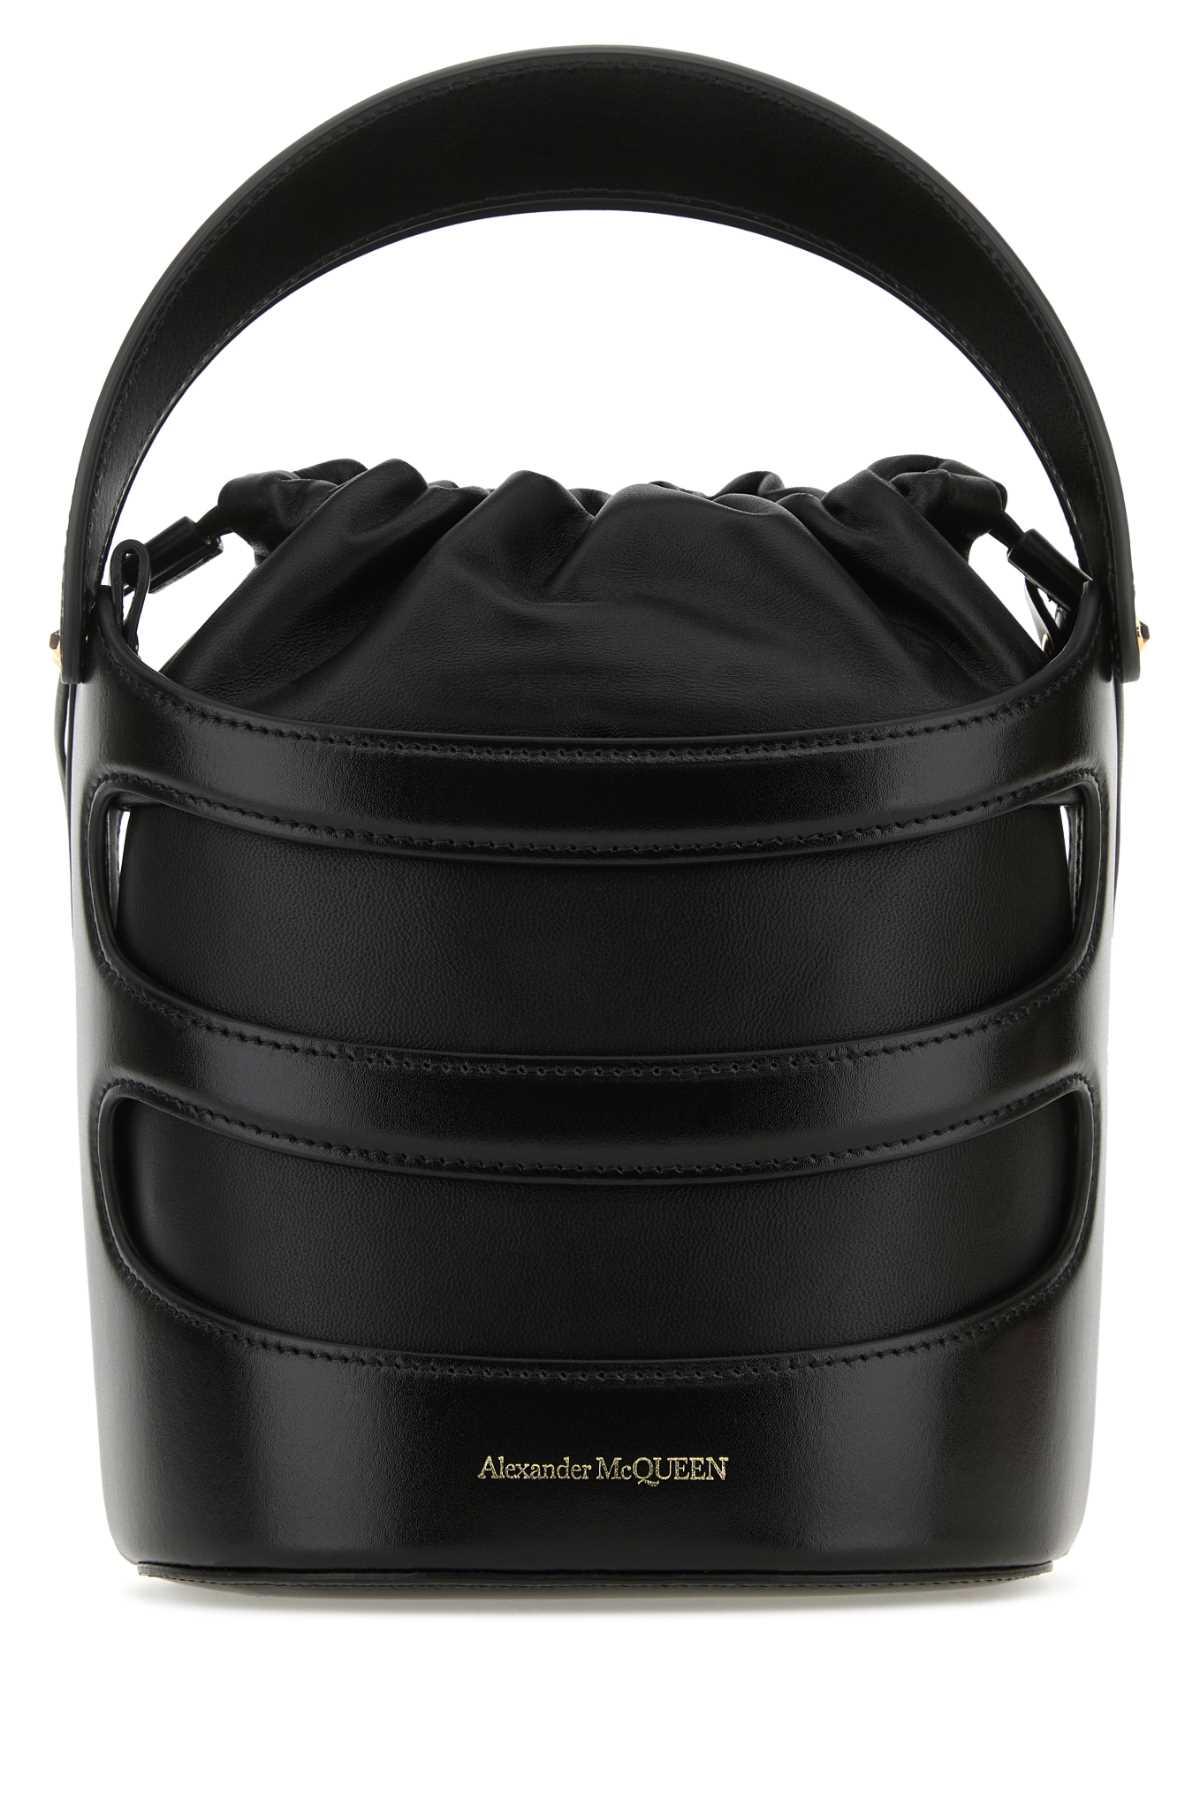 Alexander McQueen Black Leather The Rise Bucket Bag